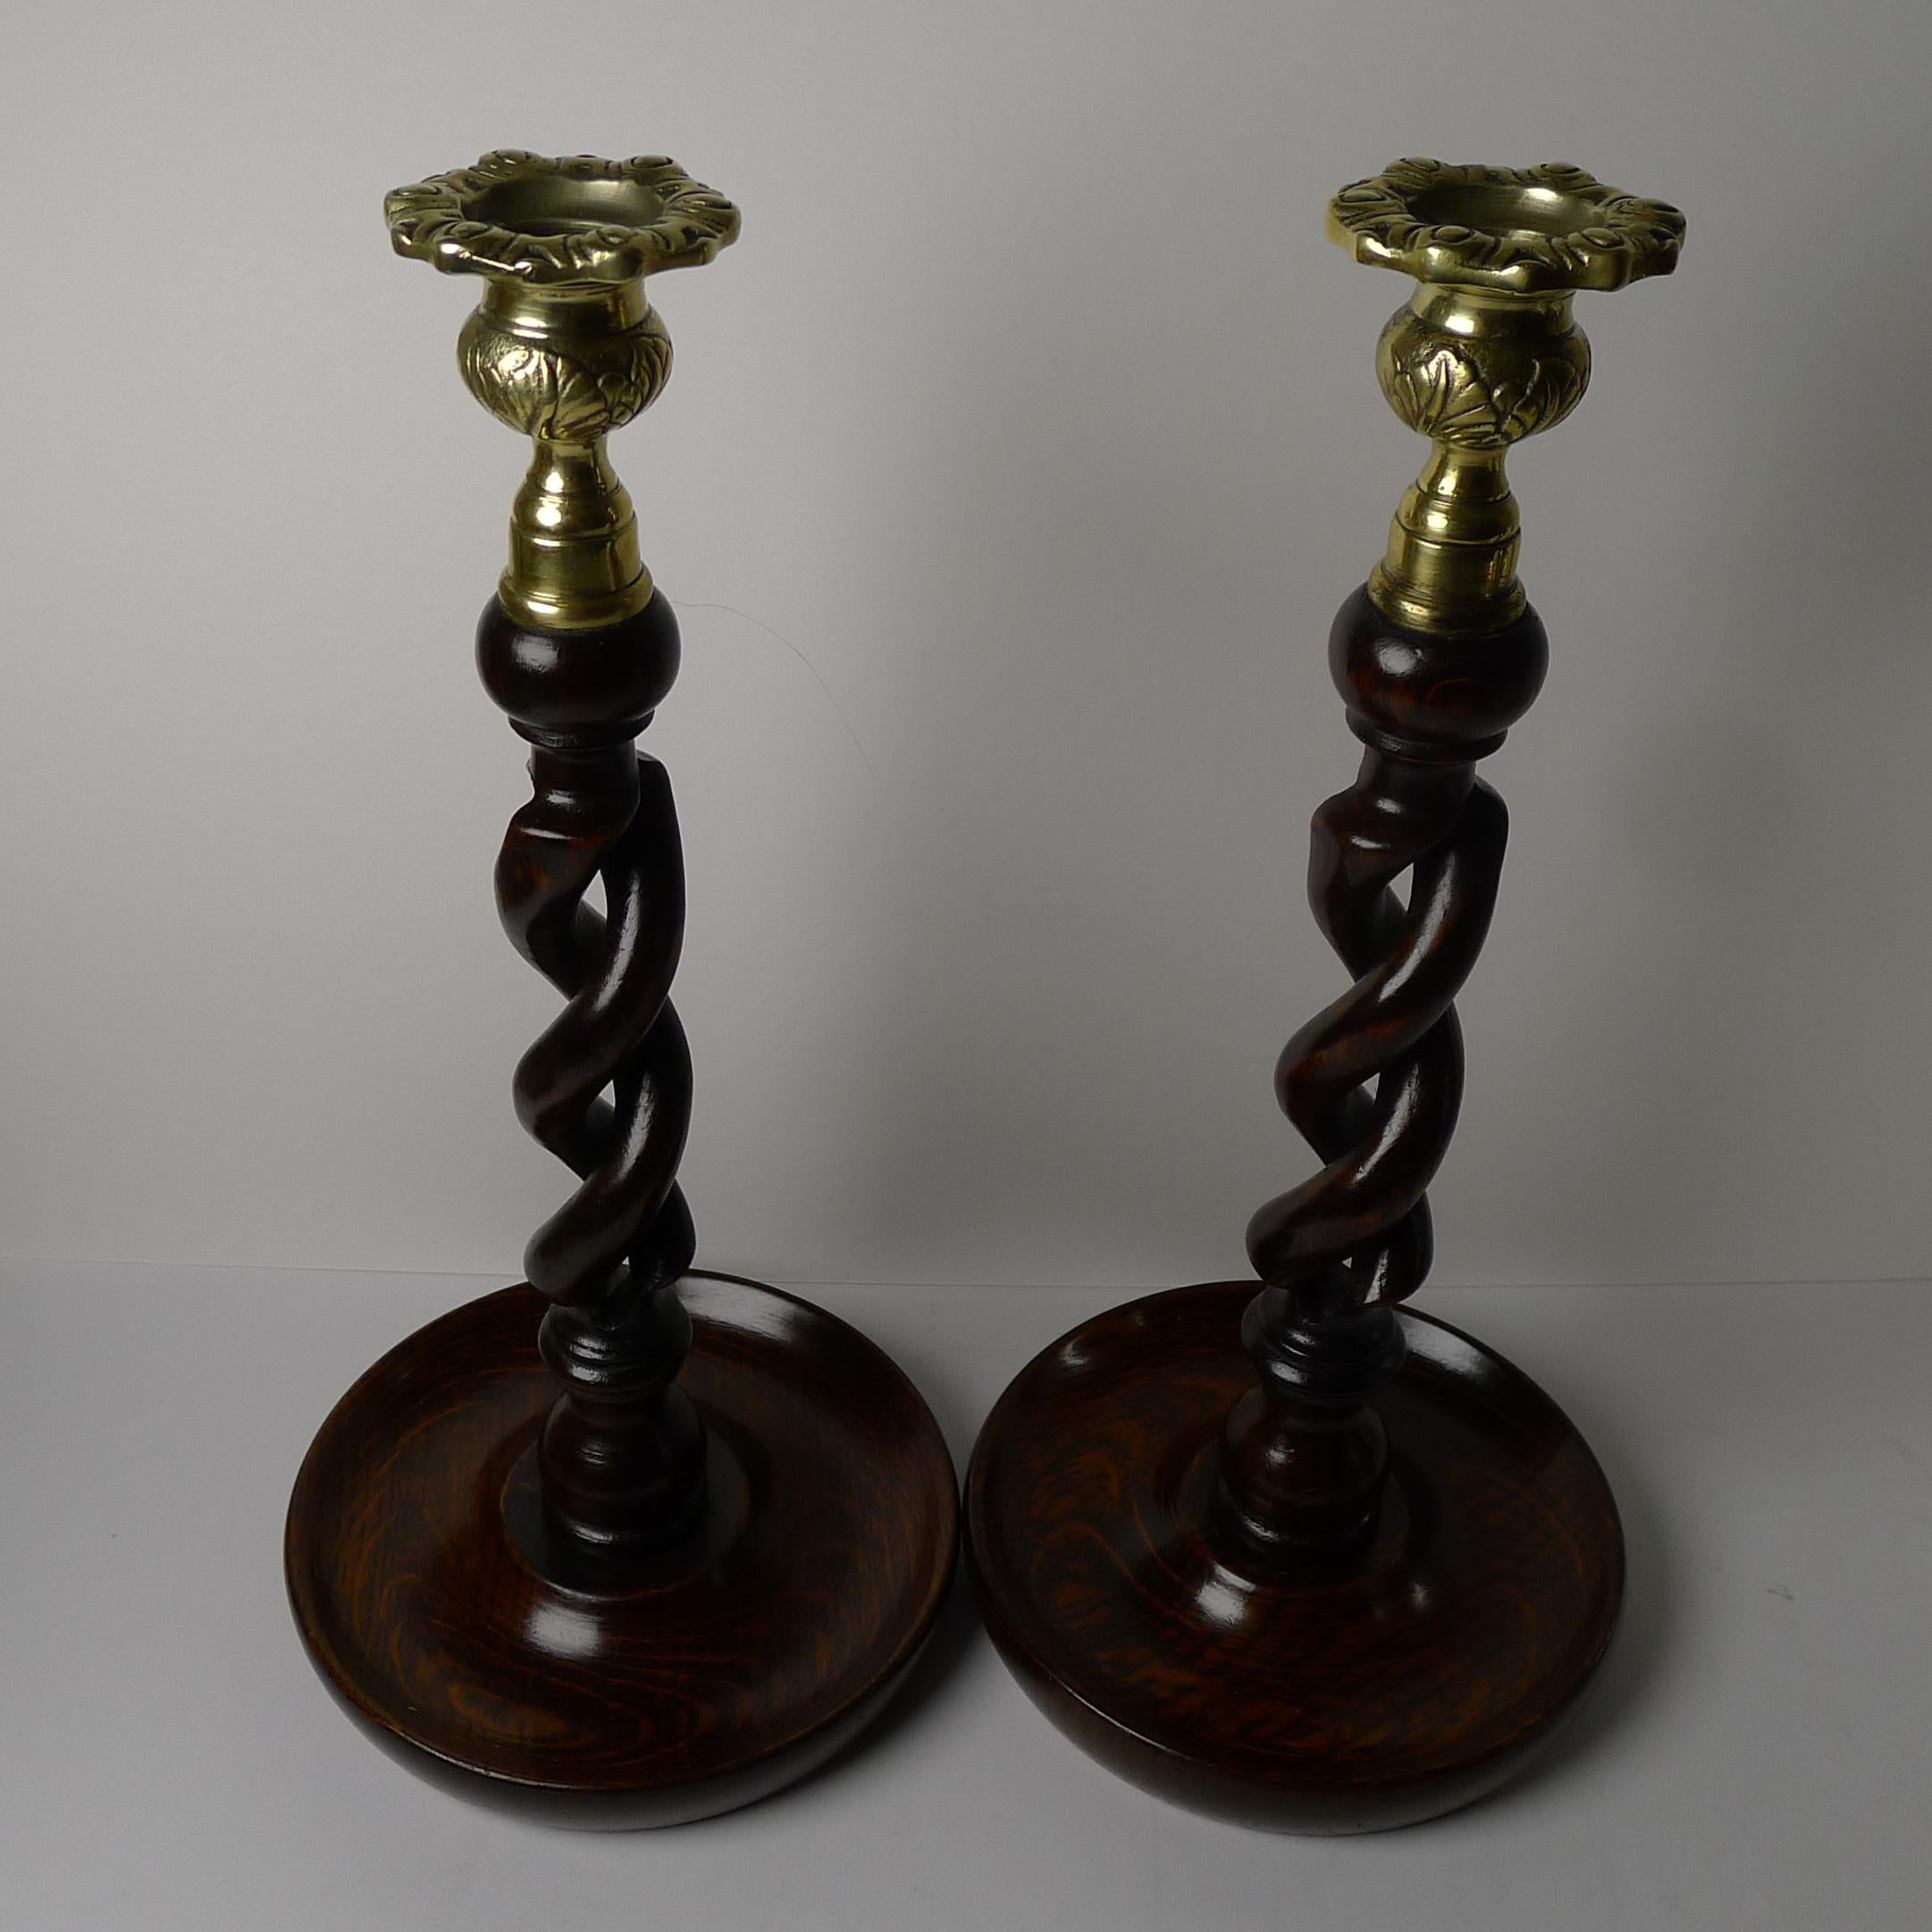 A wonderful pair of wooden candlesticks, always a winning combination, polished oak and brass.

Not to be confused with a simple pair of twists, these are the highly sought-after 